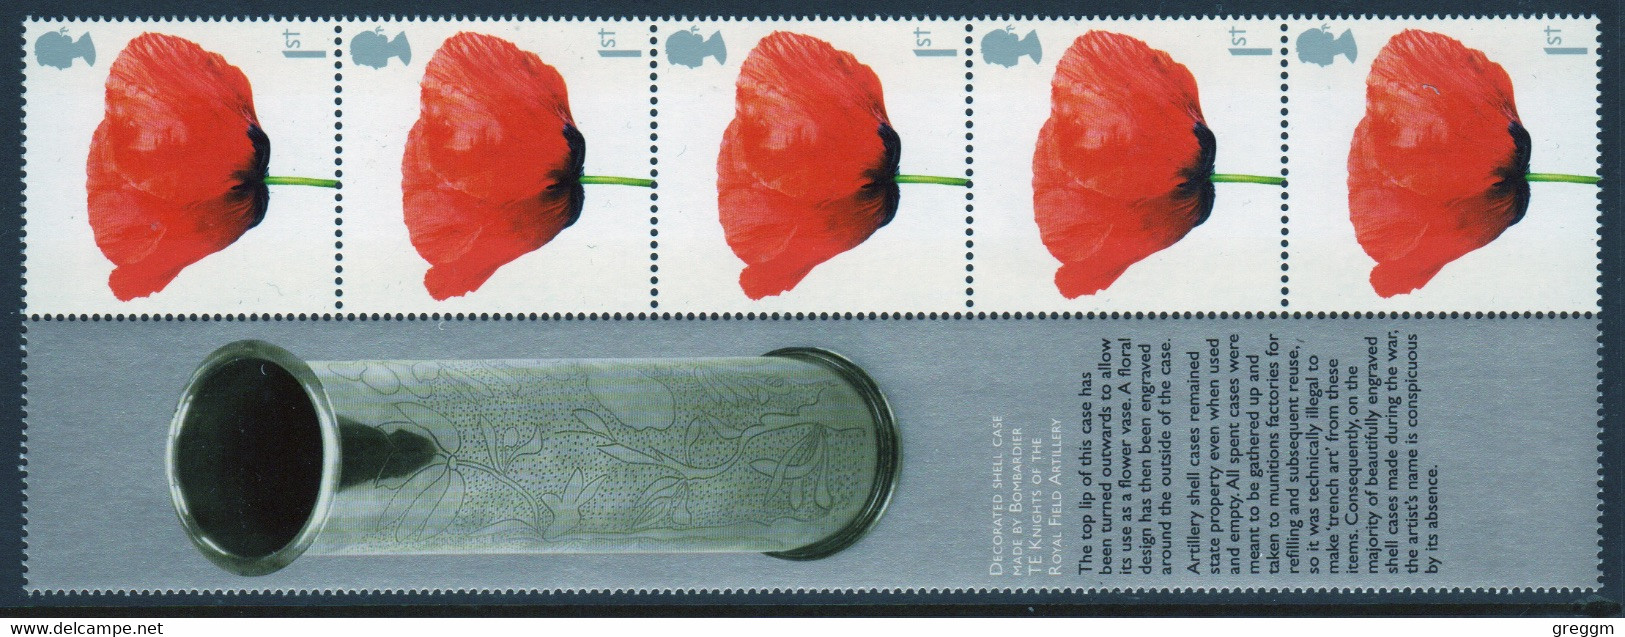 Great Britain 2008 Five 1st Smiler Sheet Commemorative Stamps With Label From The Lest We Forget Set In Unmounted Mint. - Smilers Sheets